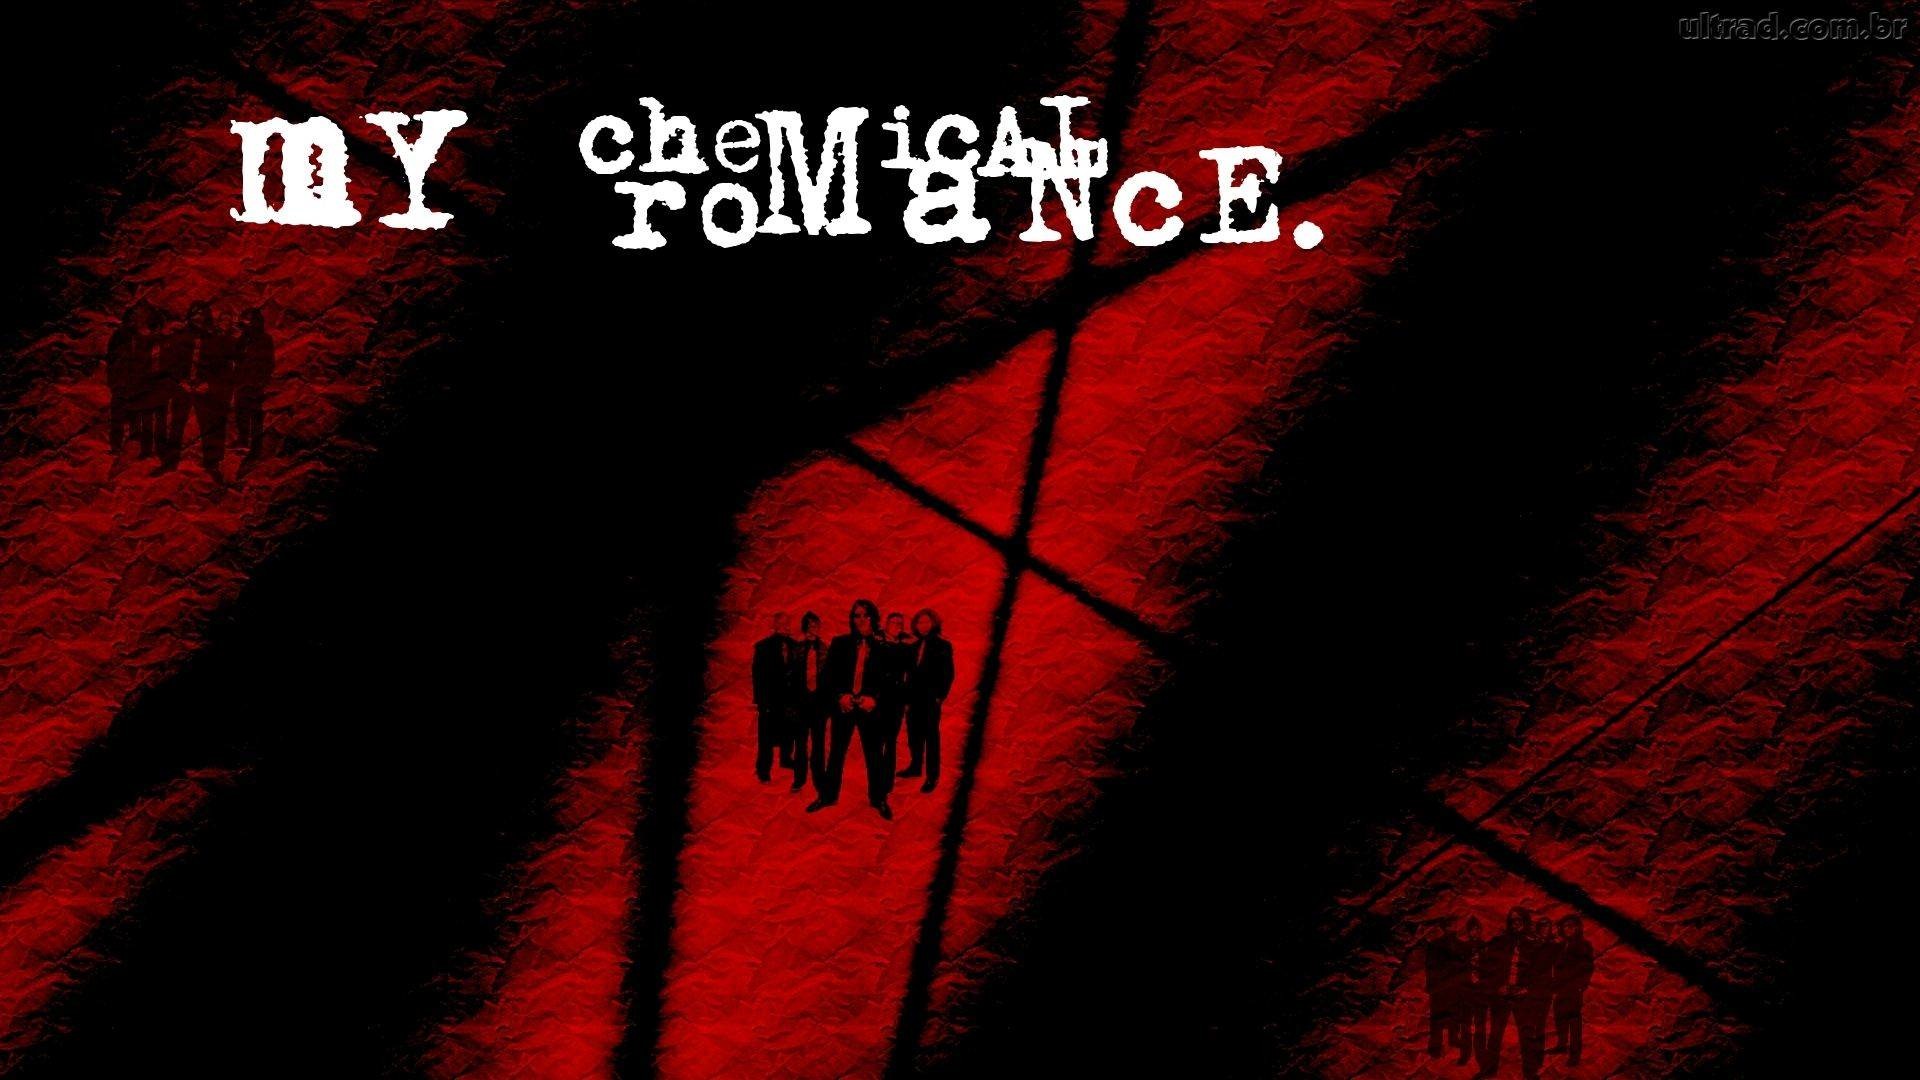 My Chemical Romance Wallpaper HD (69+ images)1920 x 1080